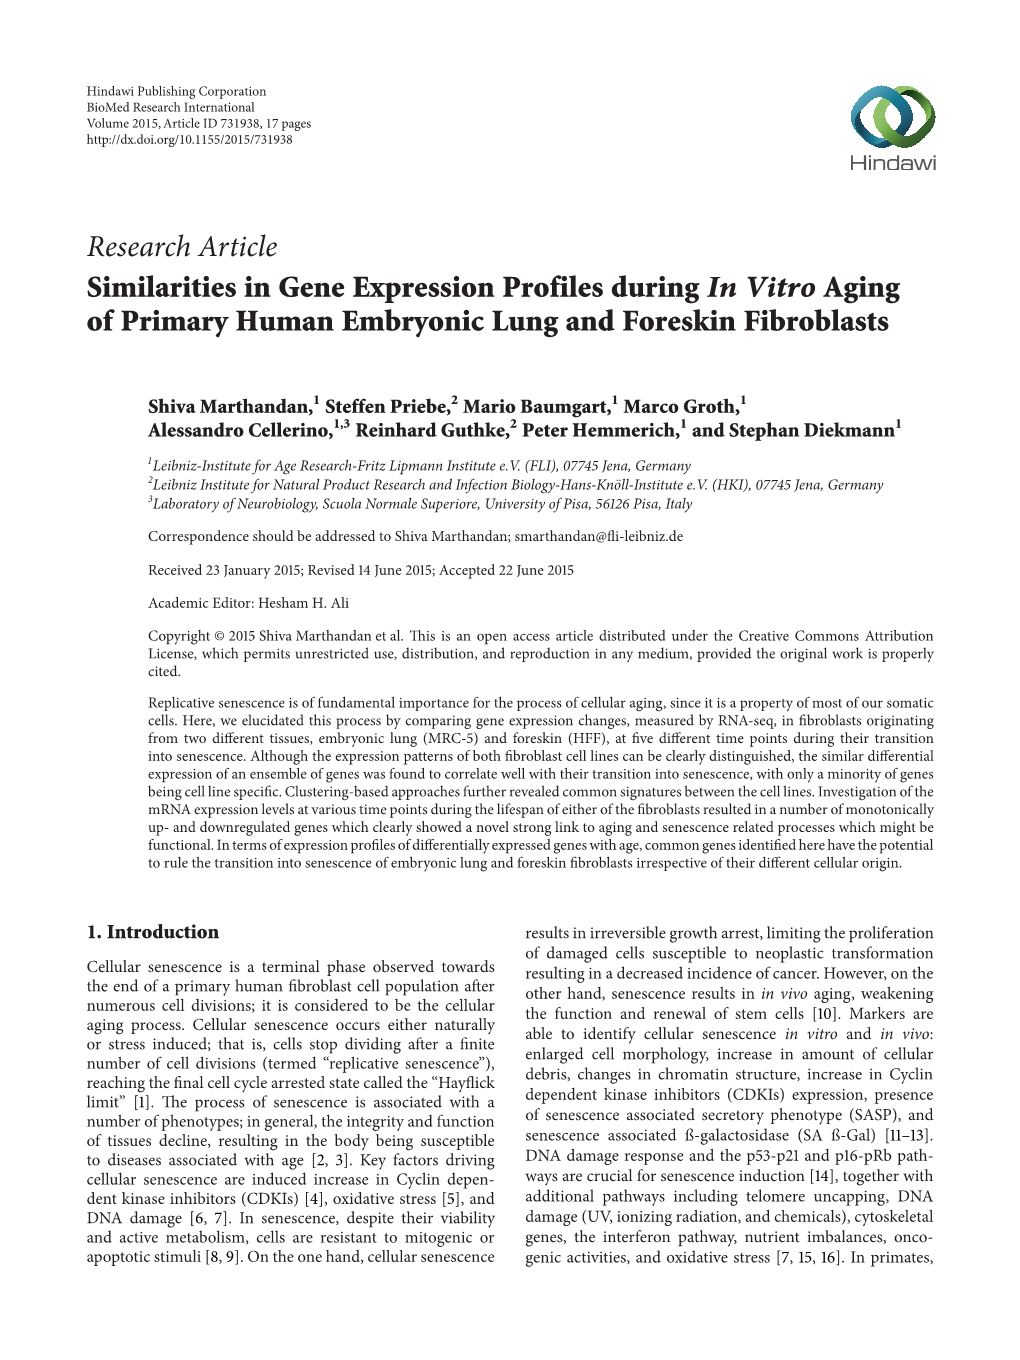 Similarities in Gene Expression Profiles During in Vitro Aging of Primary Human Embryonic Lung and Foreskin Fibroblasts